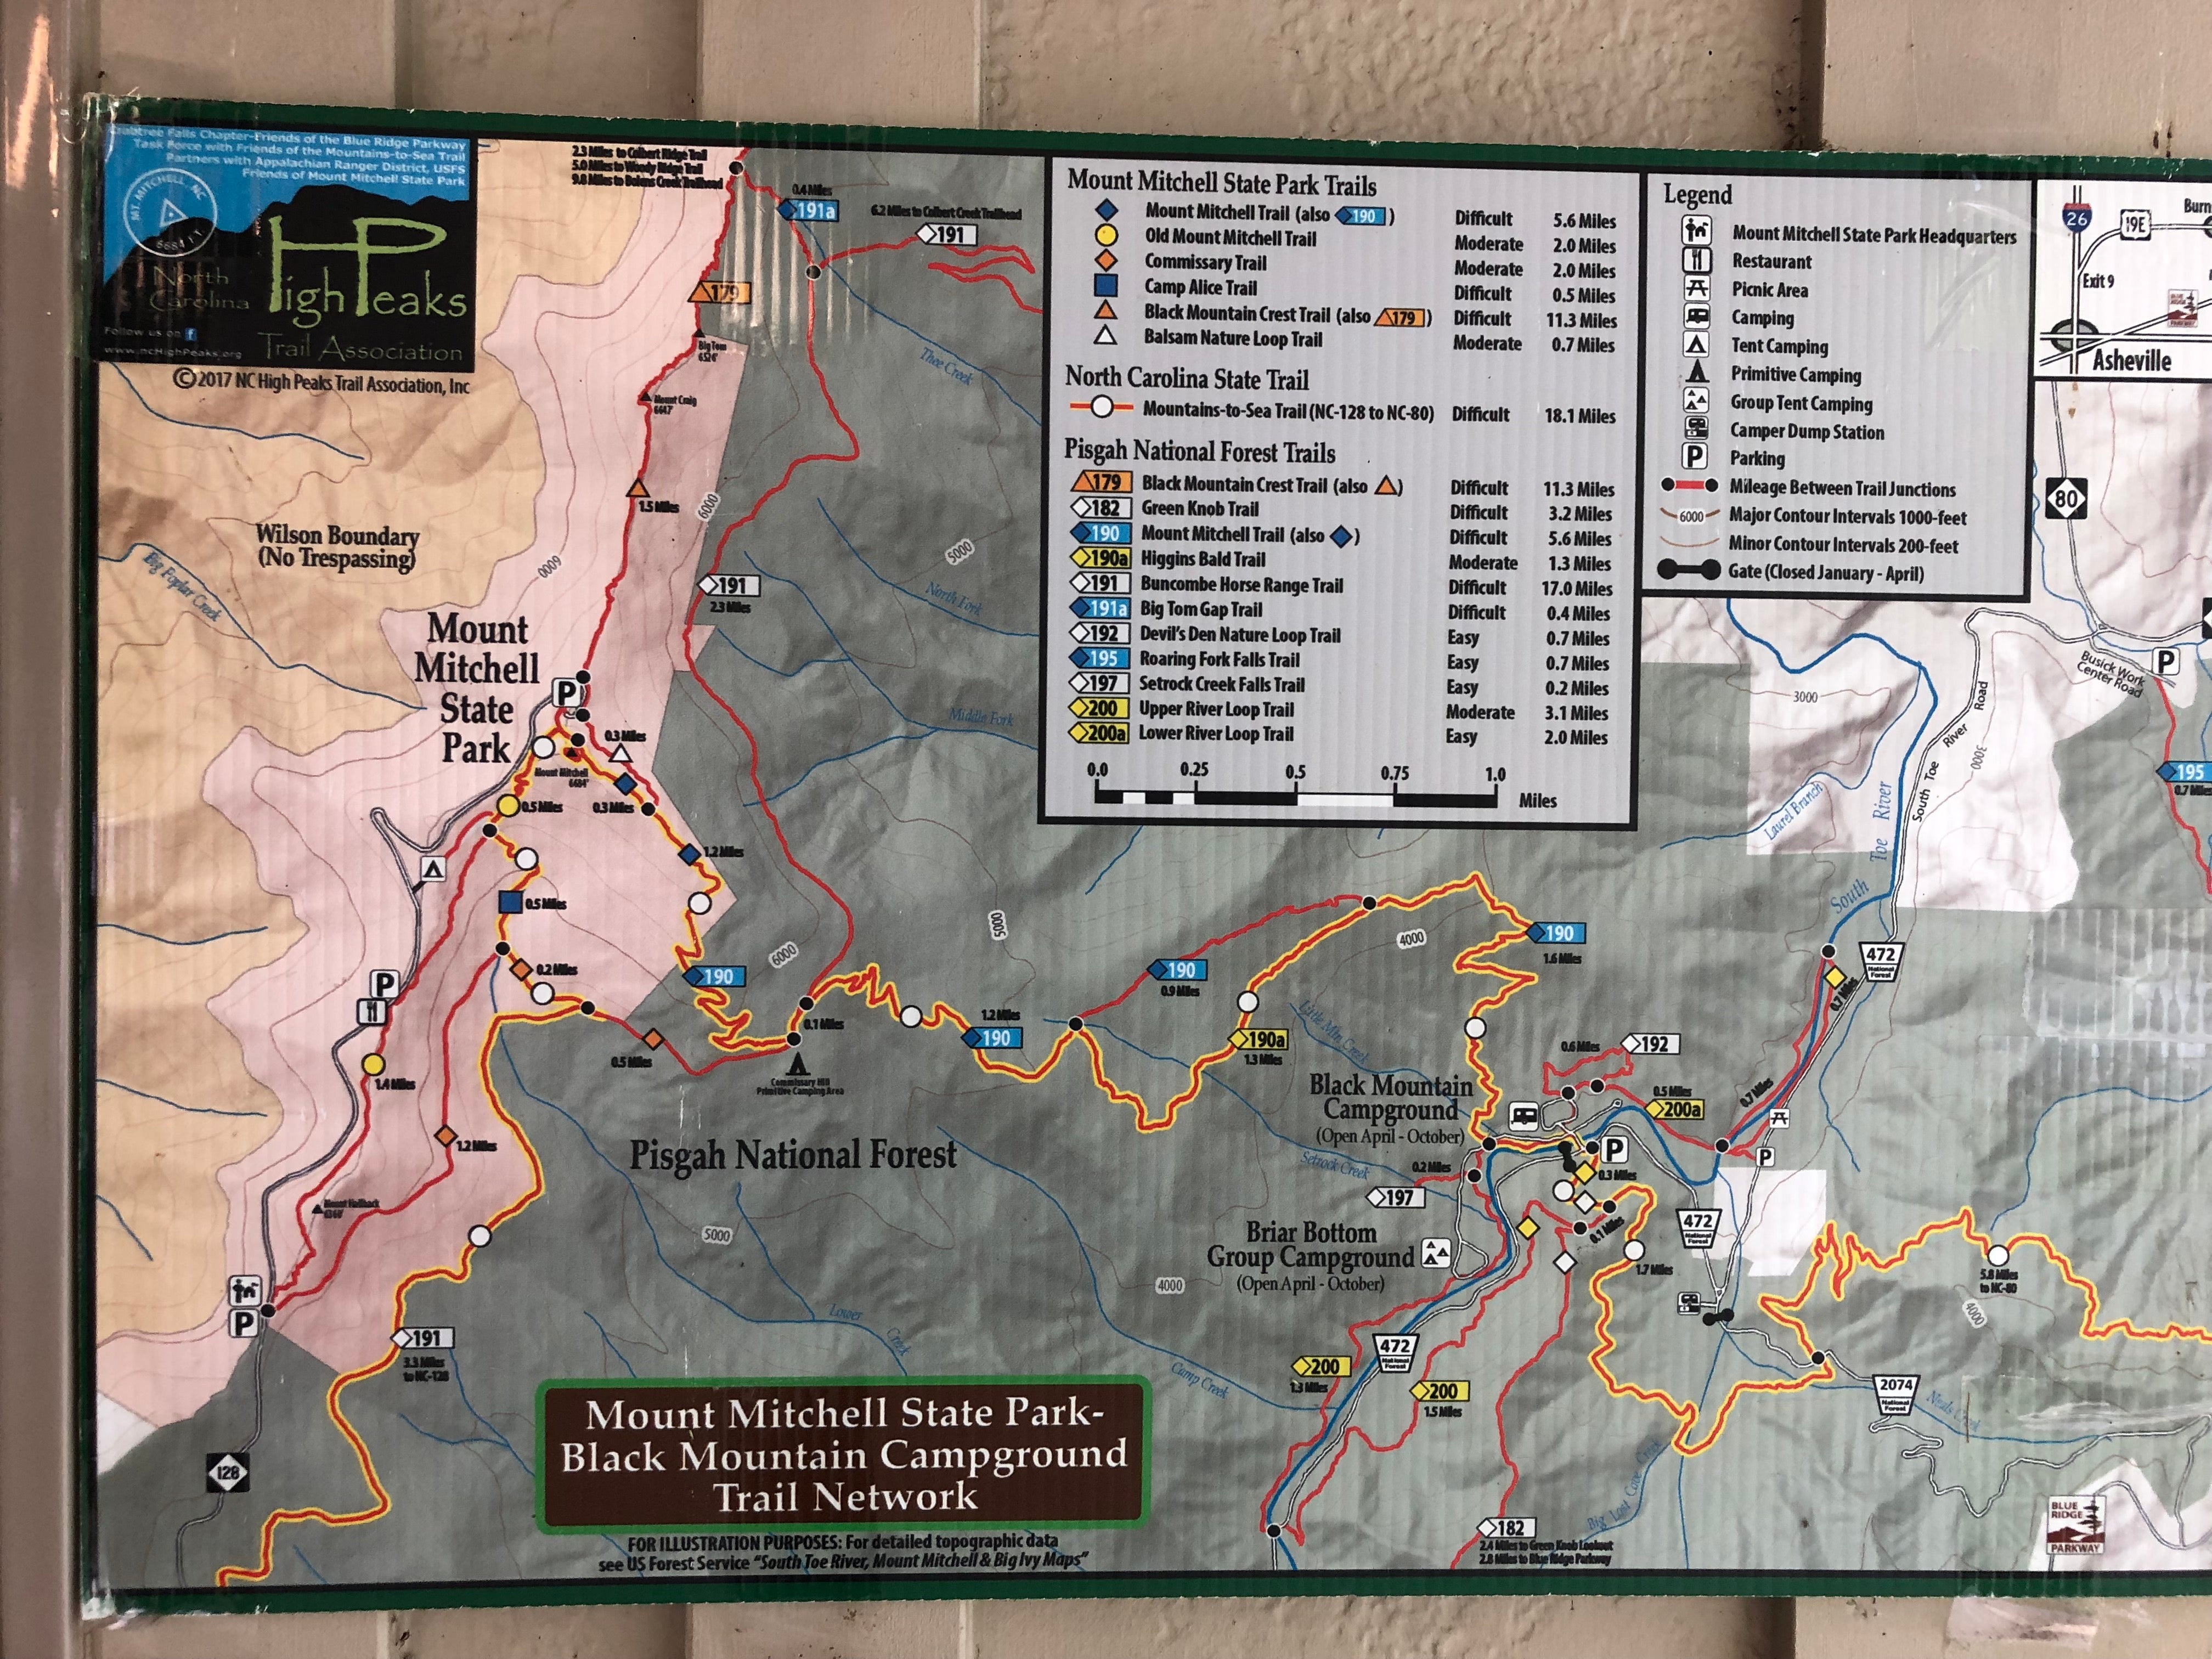 Trail map. You can see the Mt Mitchell trail departing the main campground.